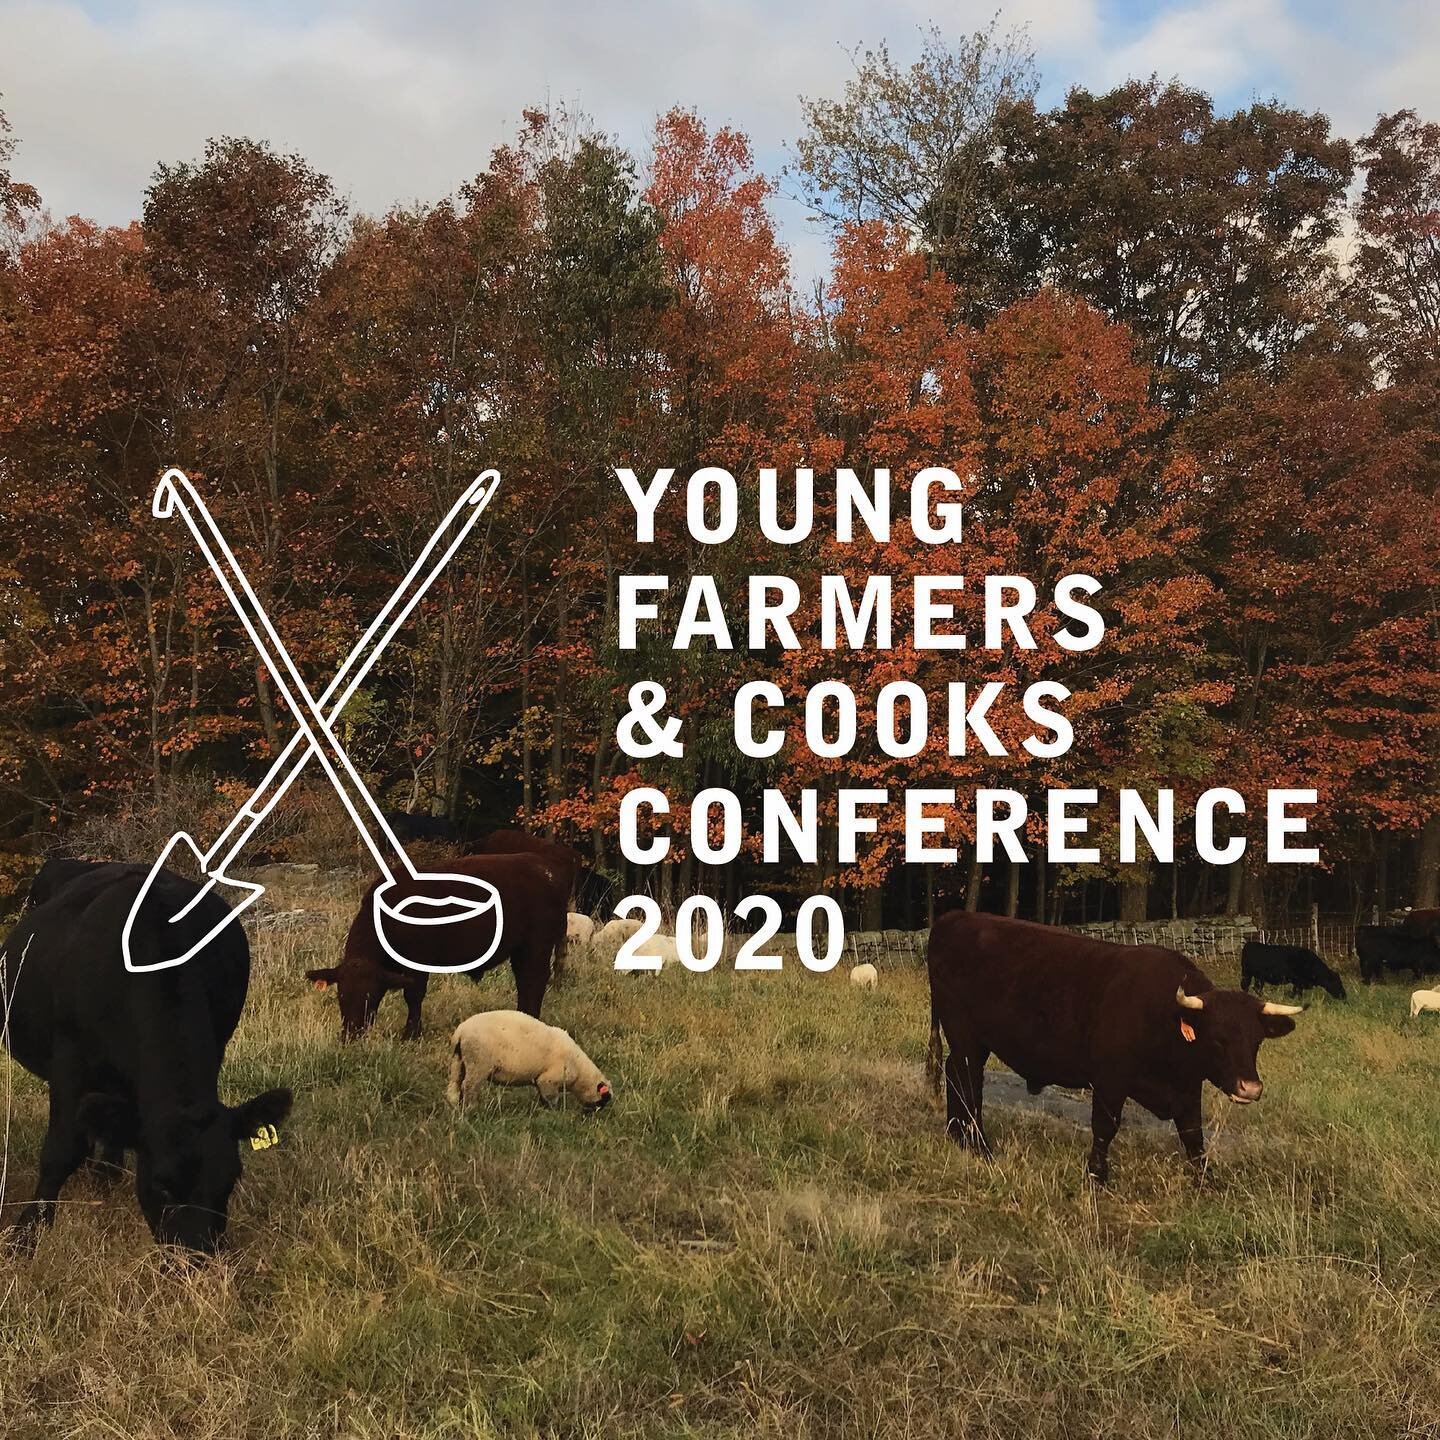 Check out the Young Farmers and Cooks conference @stonebarns next week. I&rsquo;ll be there discussing art and ecology, and how farming, cooking and ceramics are interrelated. If you are interested in attending the virtual conference you can use prom